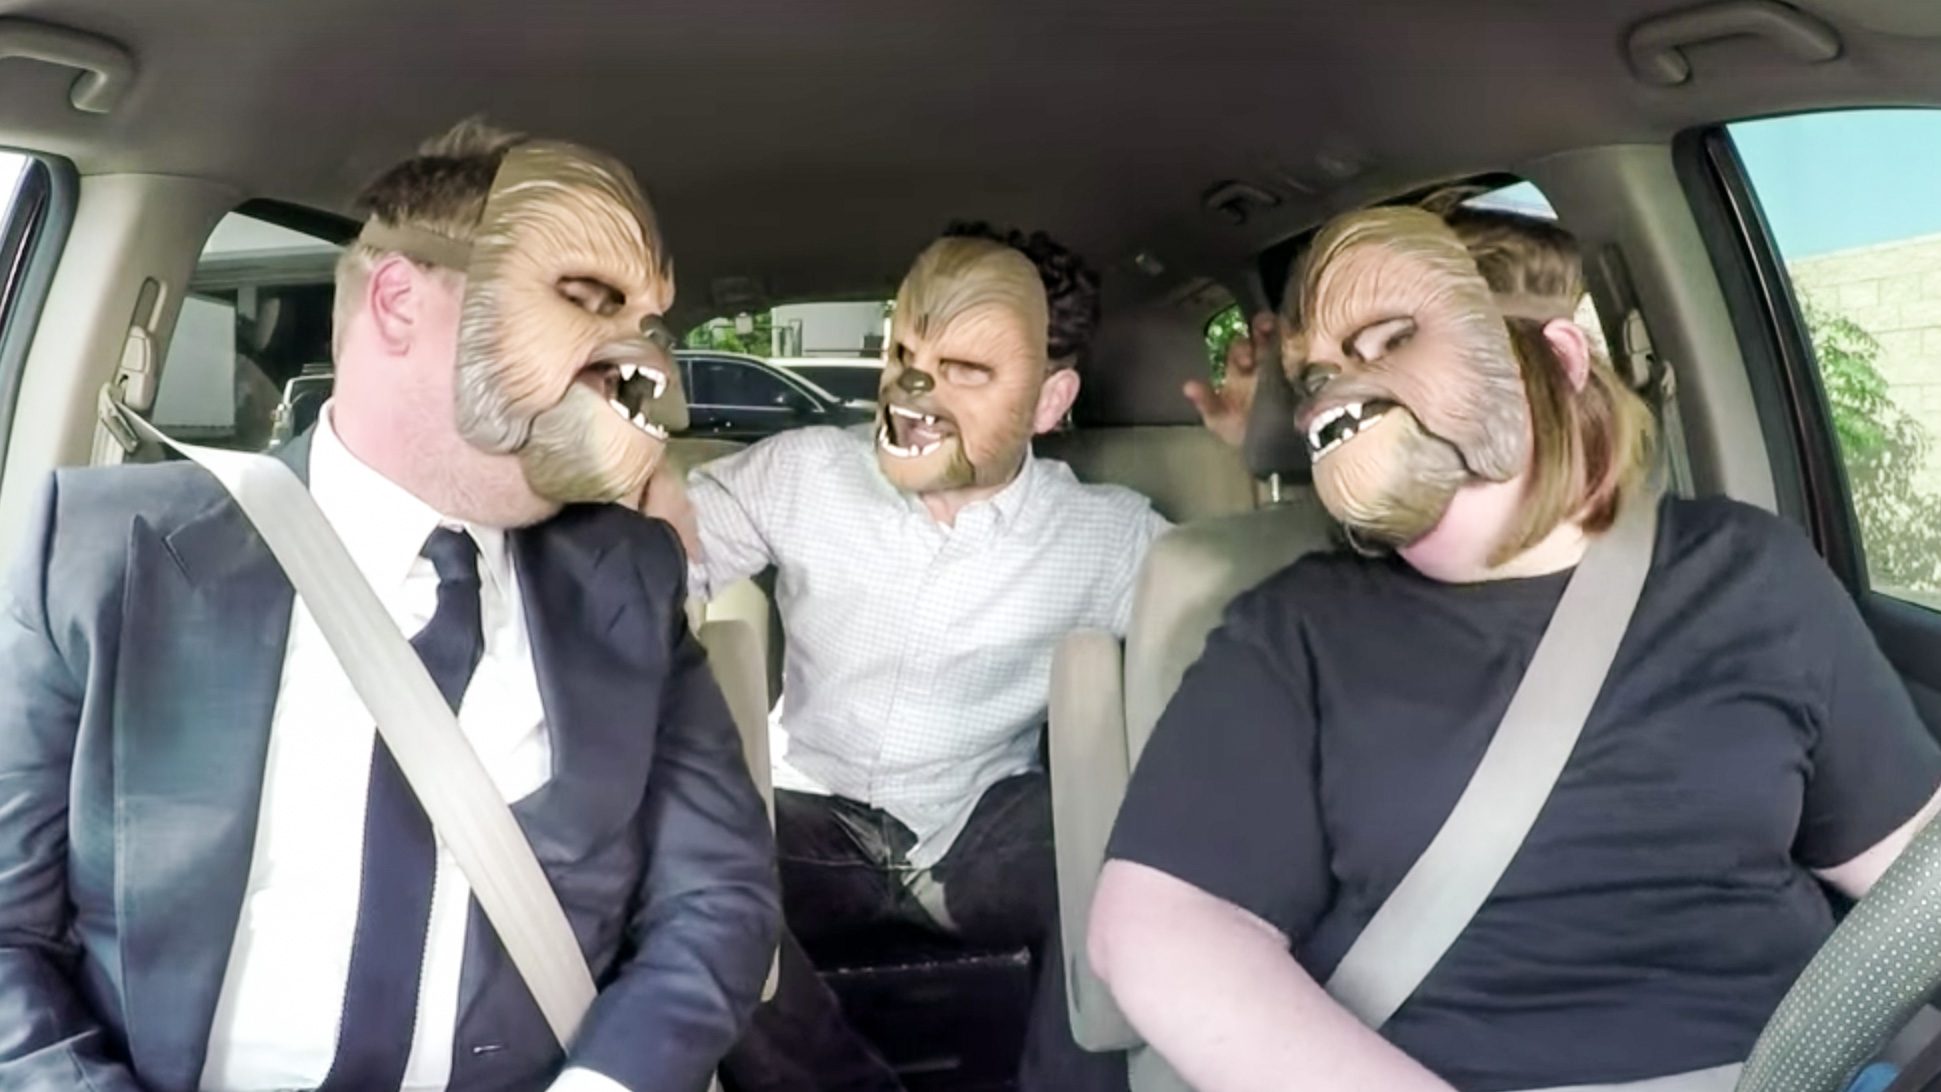 WATCH: ‘Chewbacca Mom’ drives James Corden to work, gets surprise from real Chewbacca